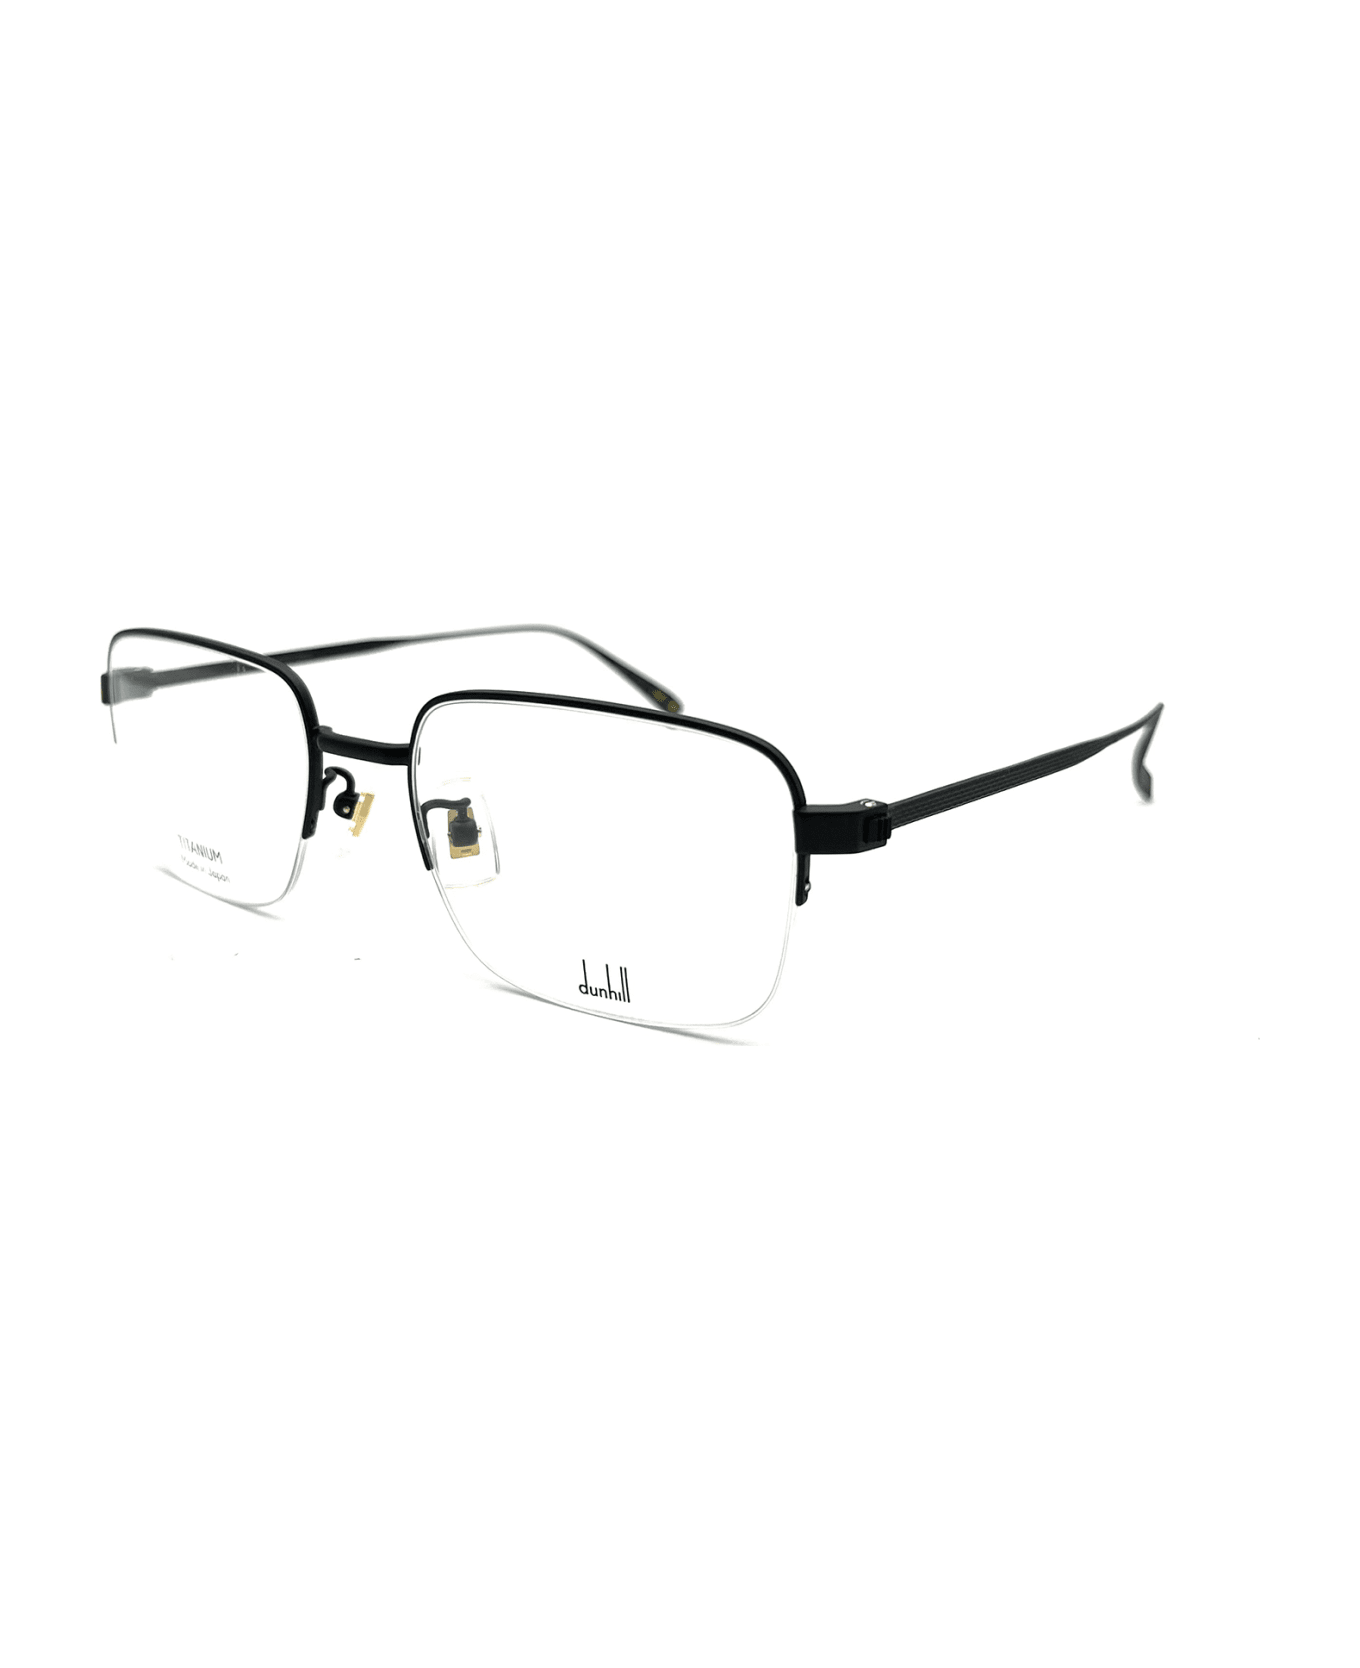 Dunhill DU0025O Eyewear - Import duties included, as applicable